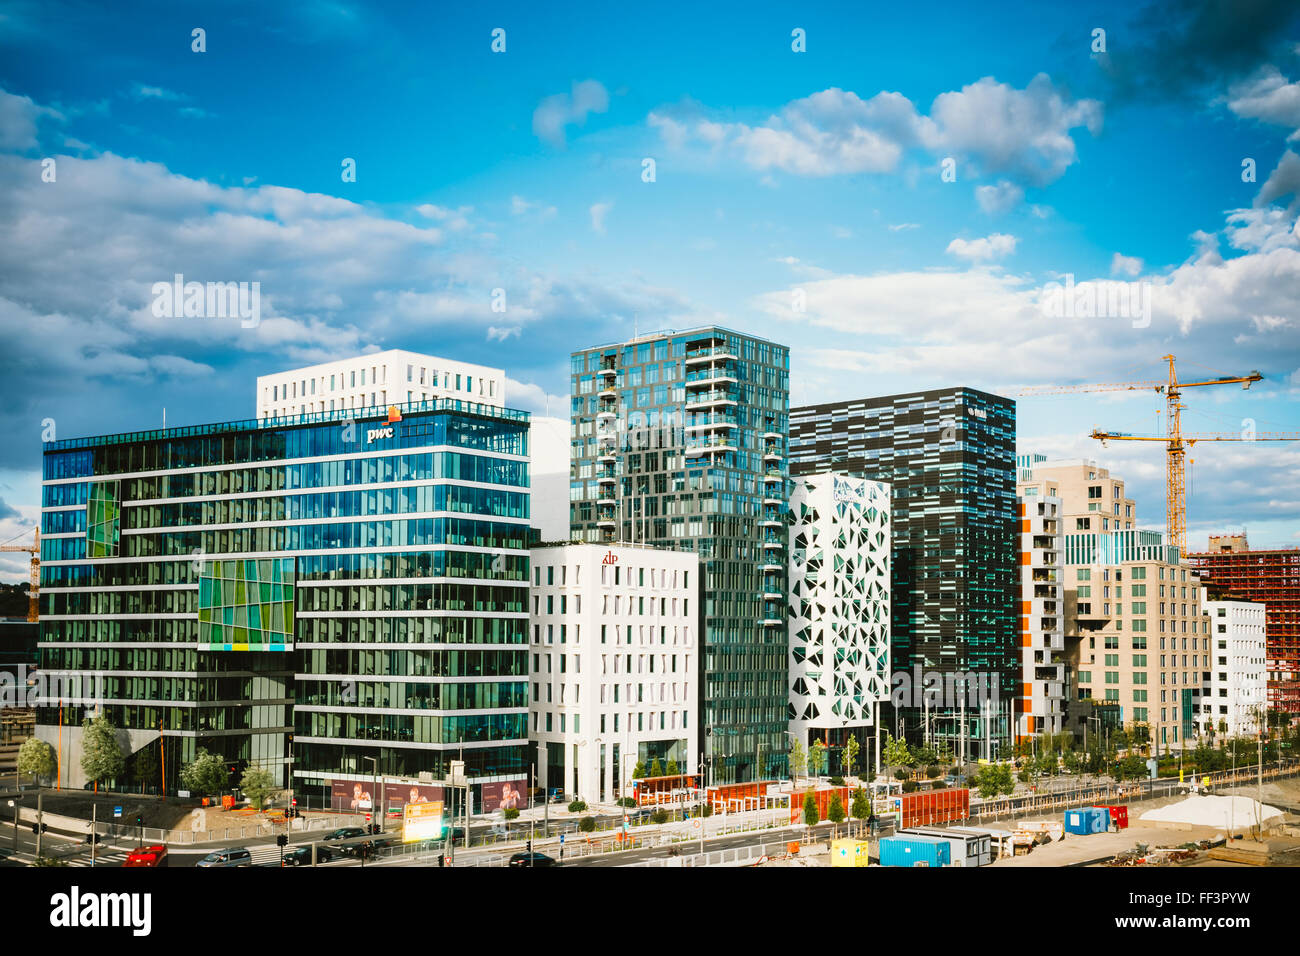 OSLO, NORWAY - JULY 31, 2014: View of Cityscape in Oslo, Norway. Summer Season Stock Photo